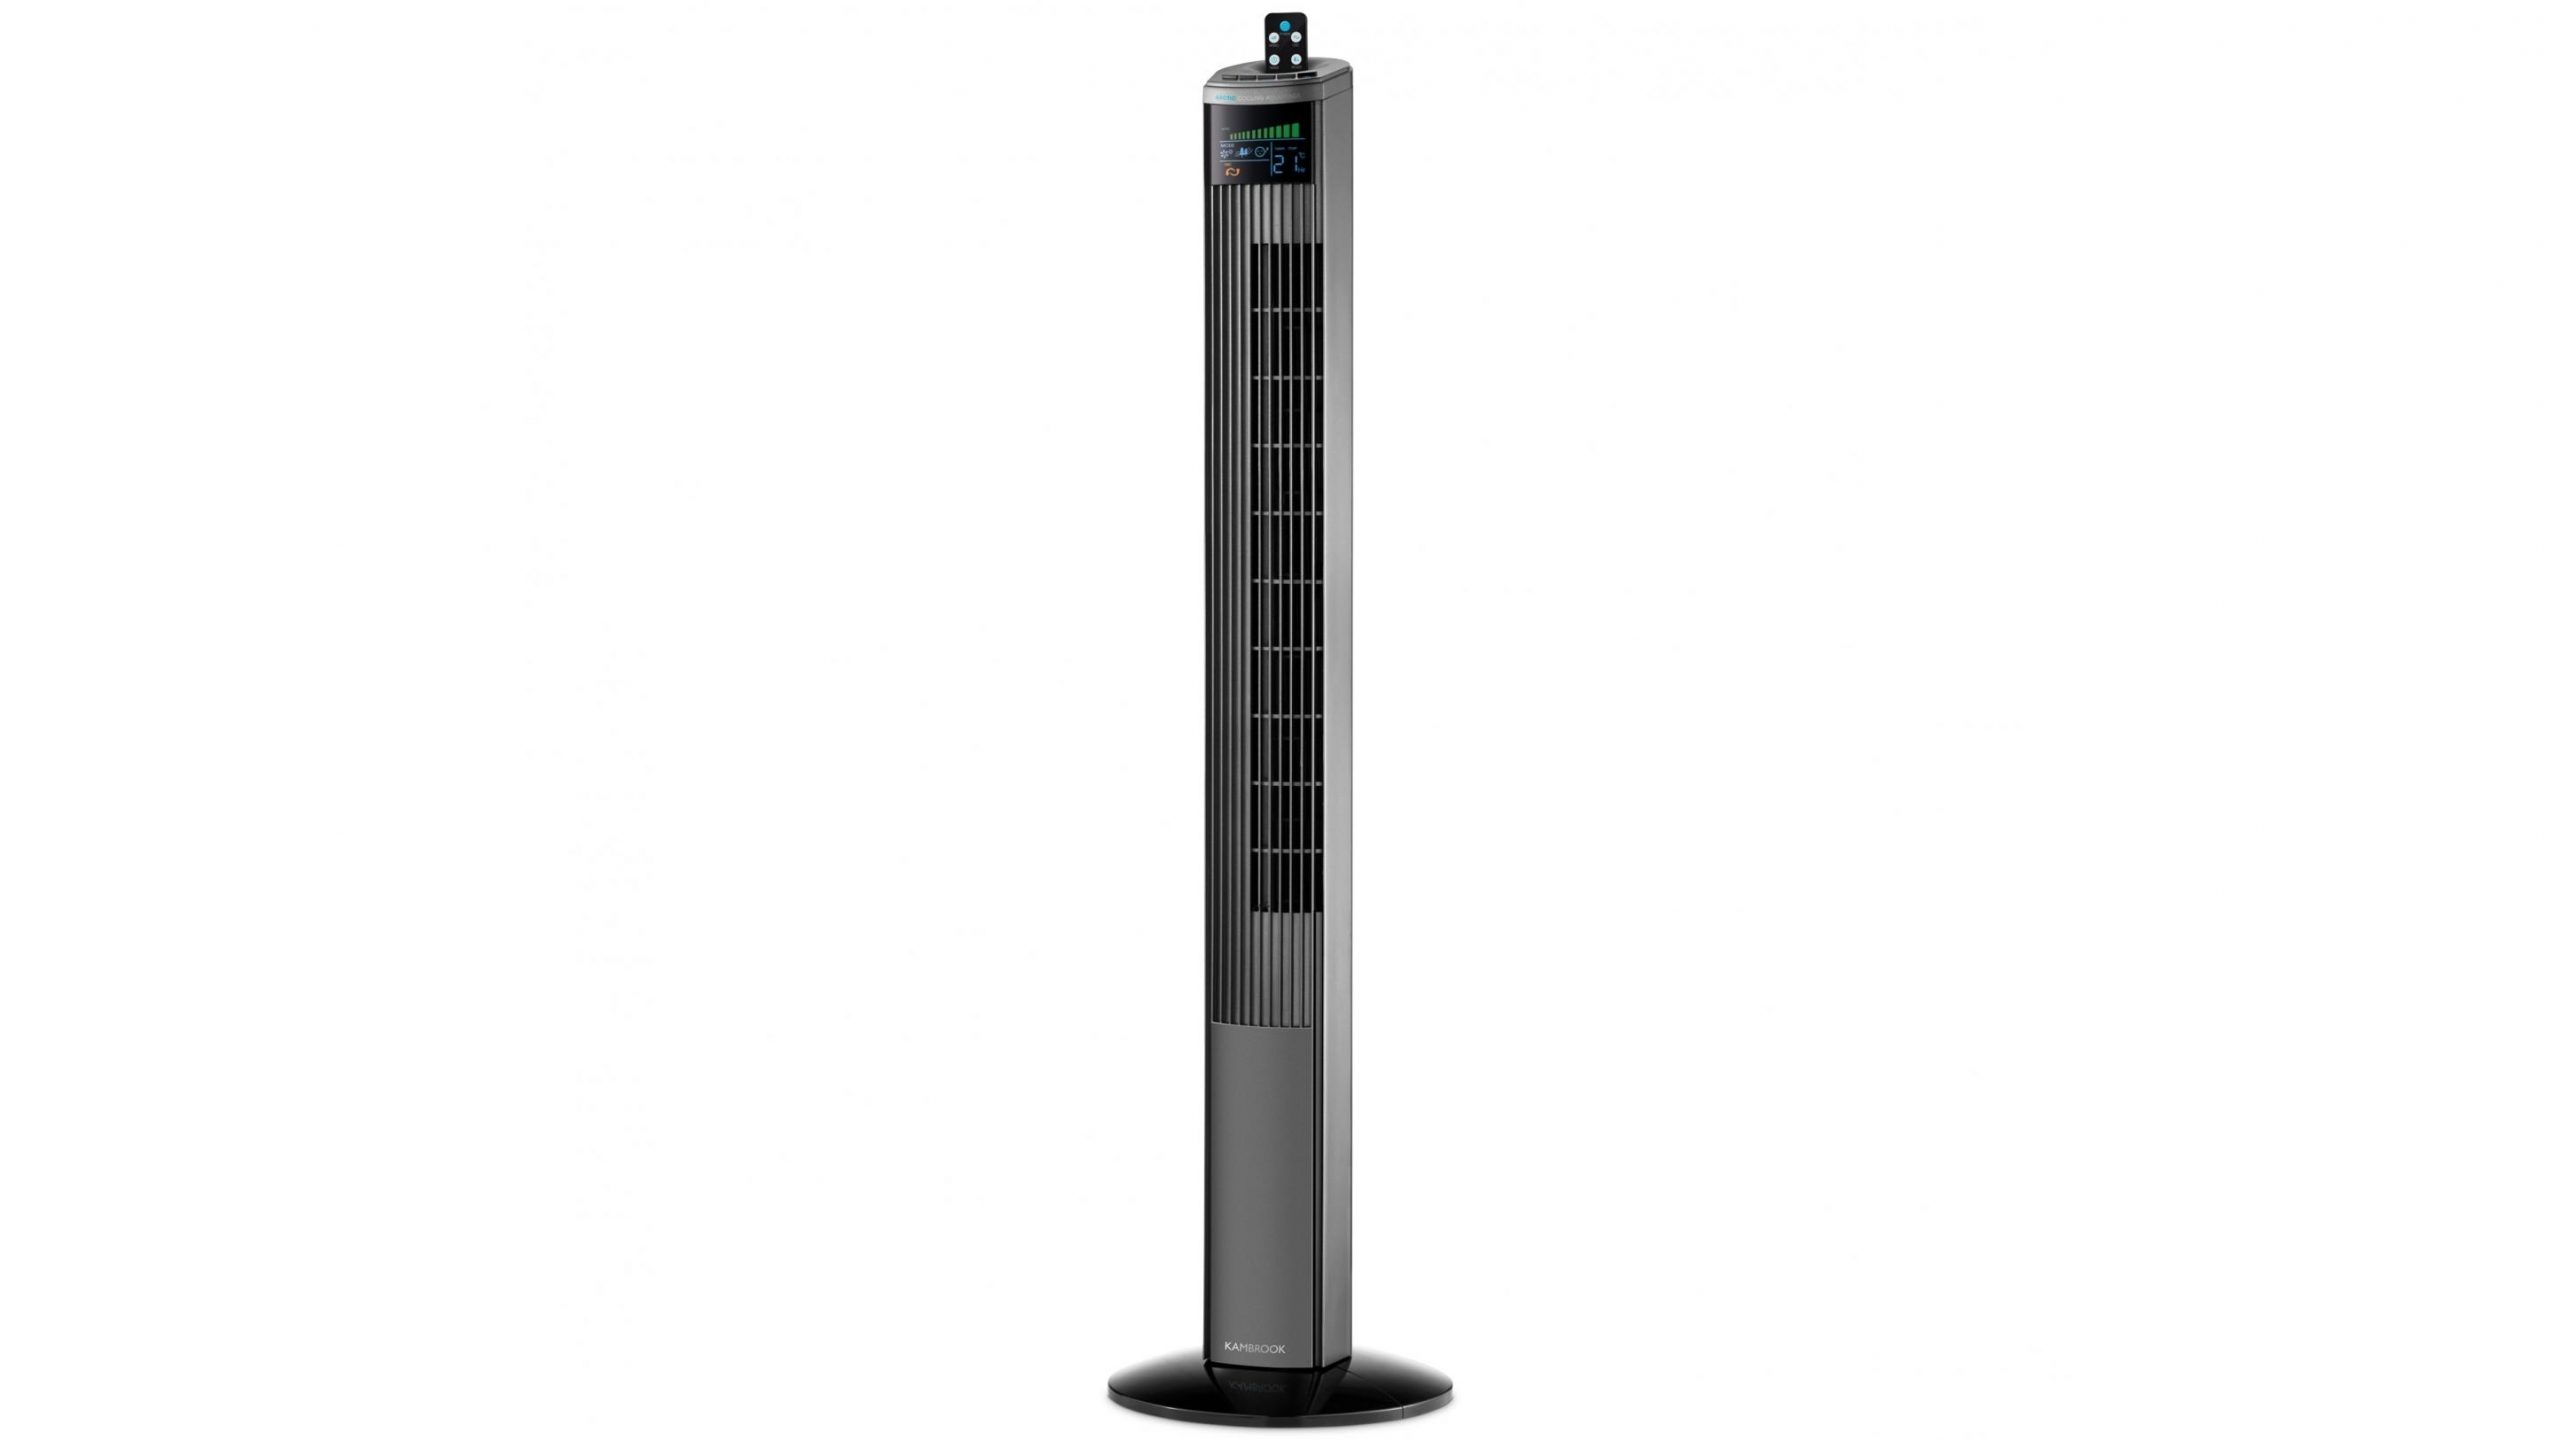 Kambrook 116cm Arctic Tower Fan With Led Display with regard to measurements 2889 X 1625